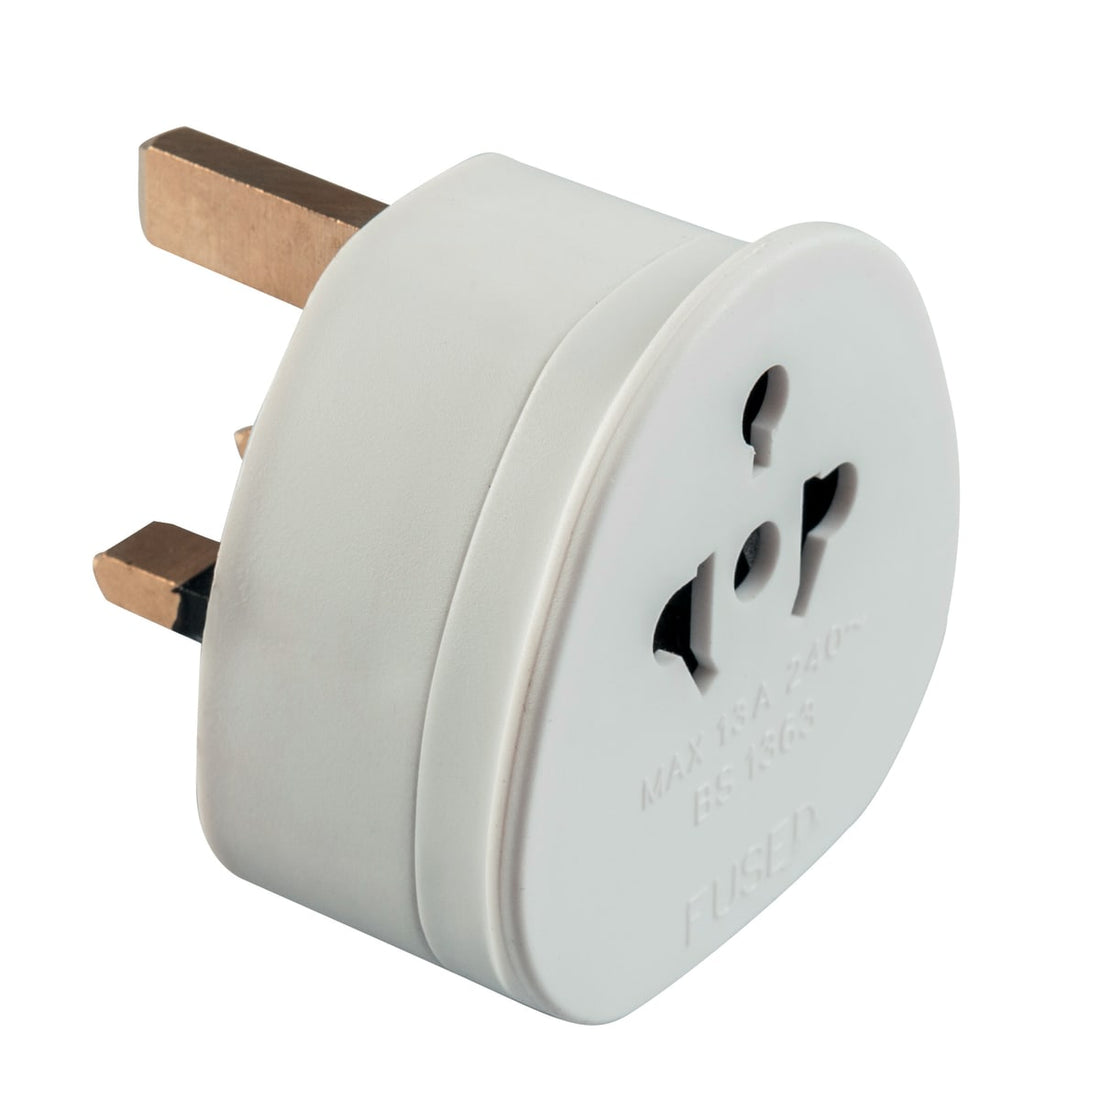 ITALY-ENGLAND TRAVEL ADAPTER WITH 13A PLUG 10A SOCKET WHITE